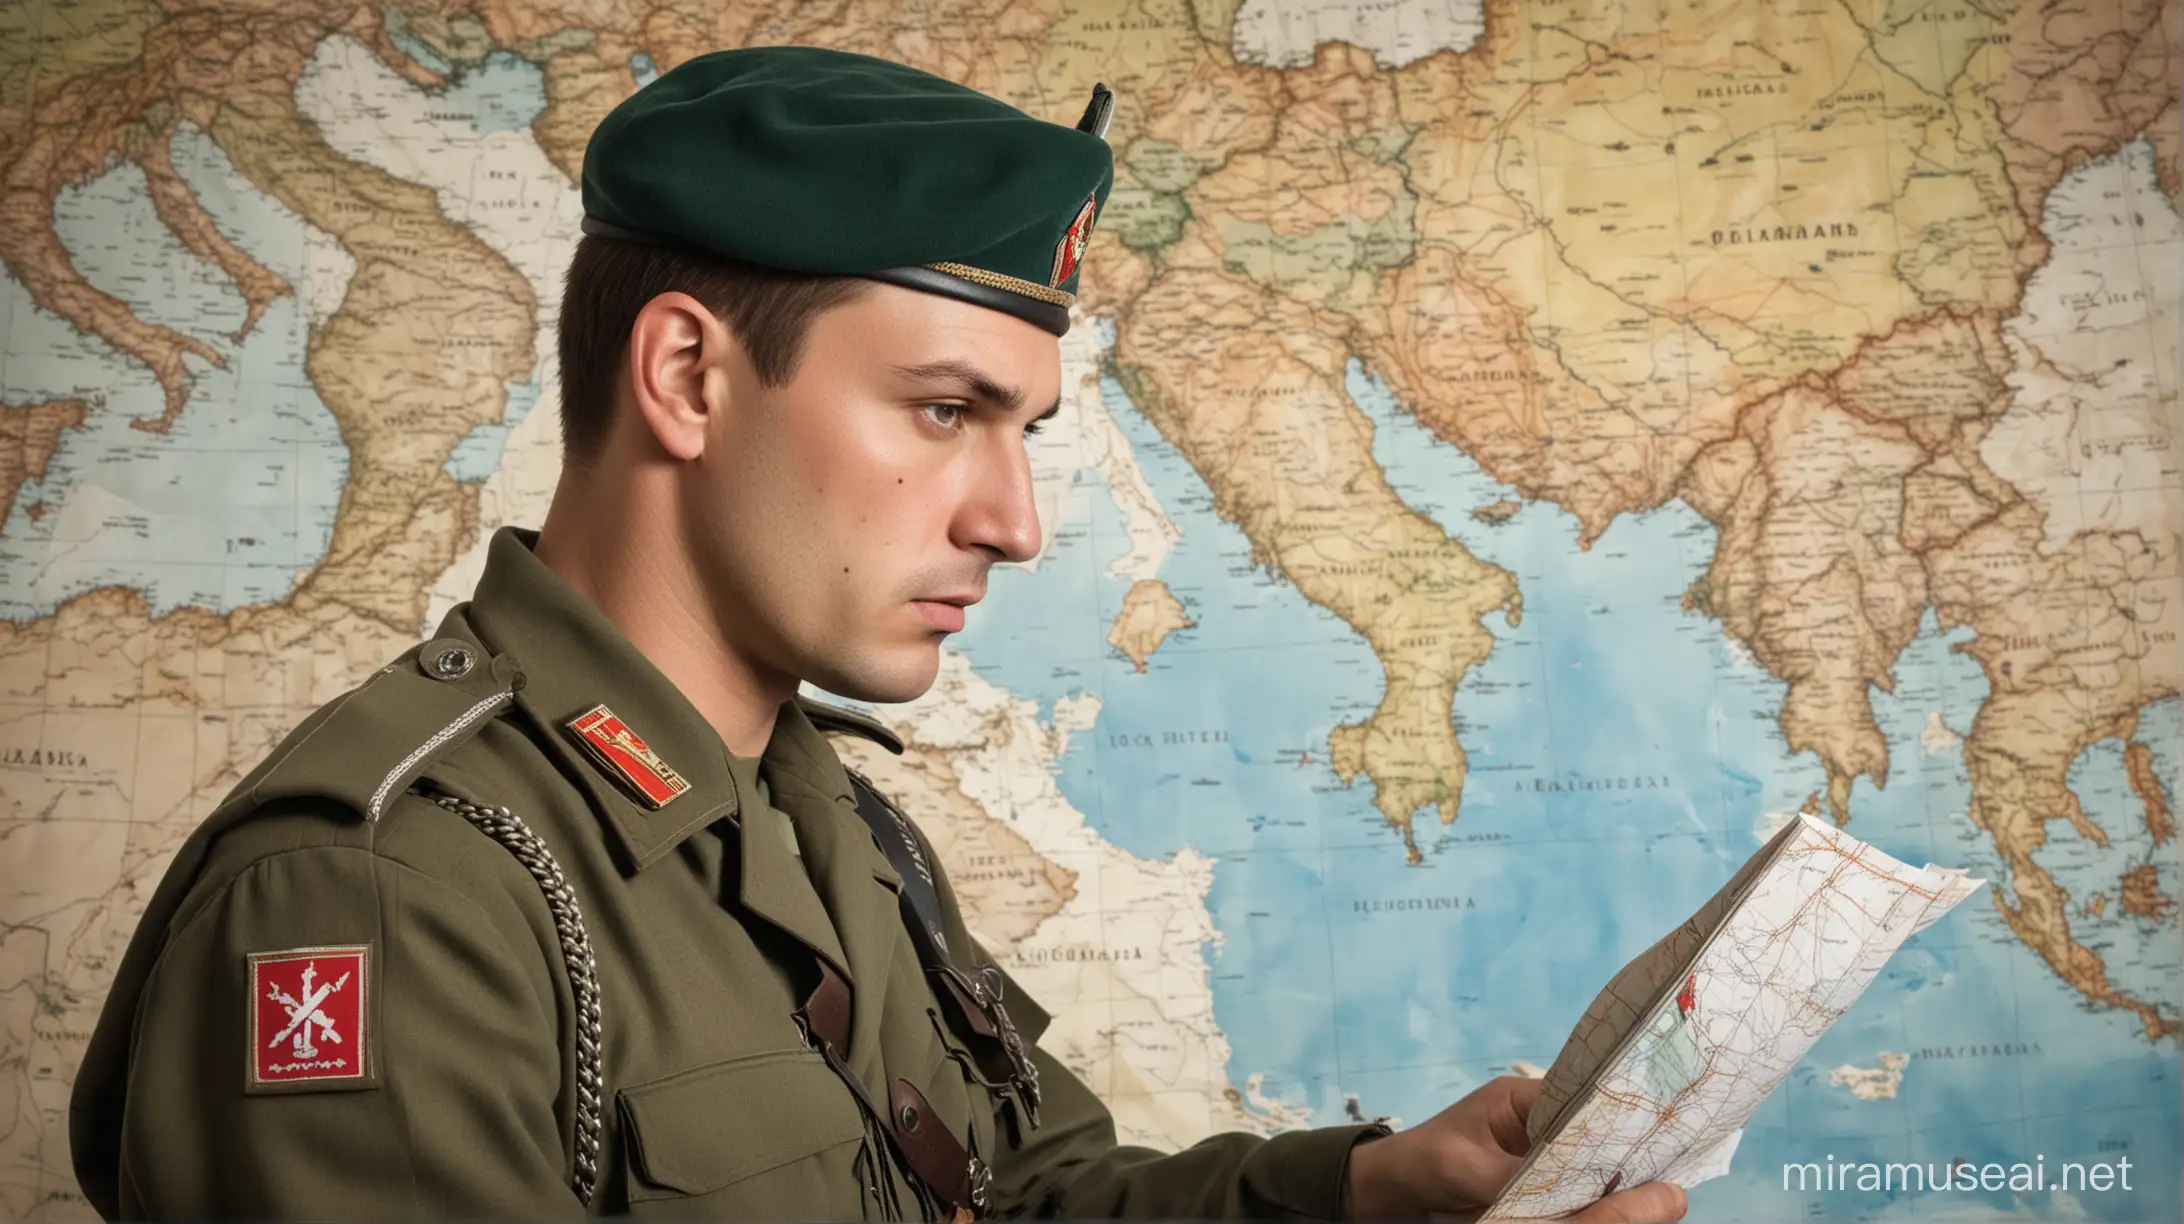 Russian Soldier in Military Uniform Studying Map of Balkans